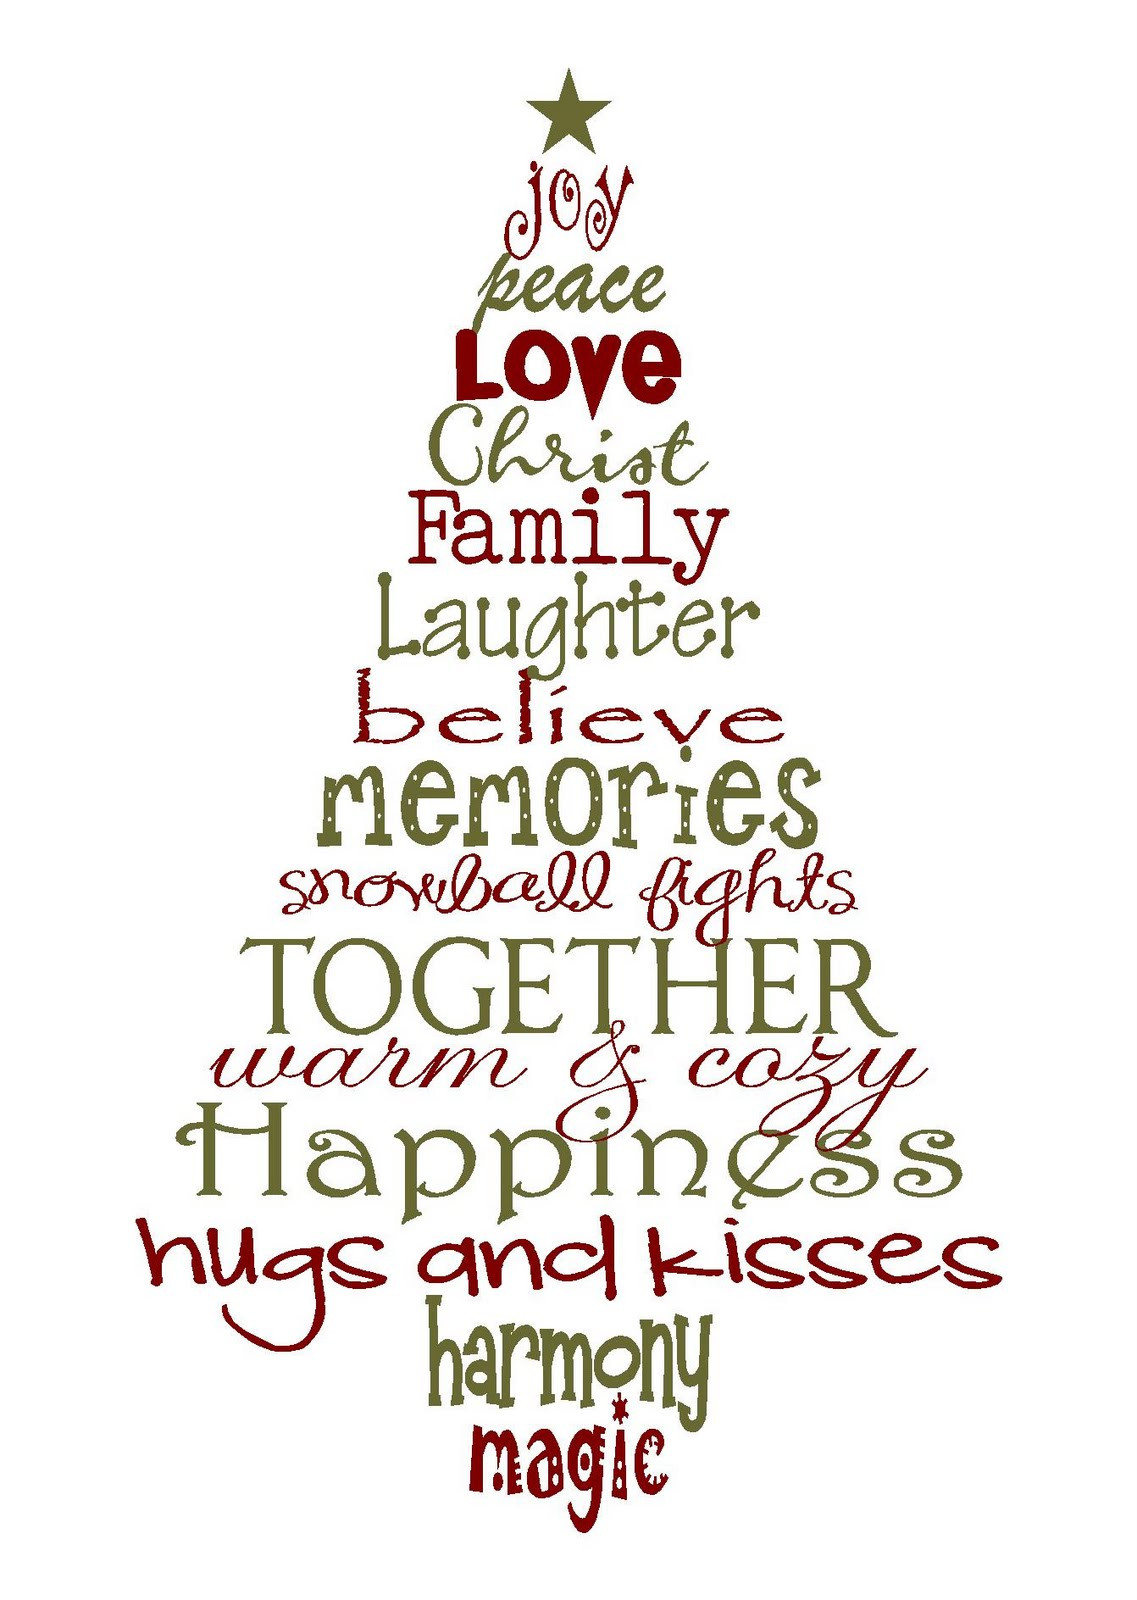 Quotes About Christmas Trees
 Tree Quotes And Sayings QuotesGram